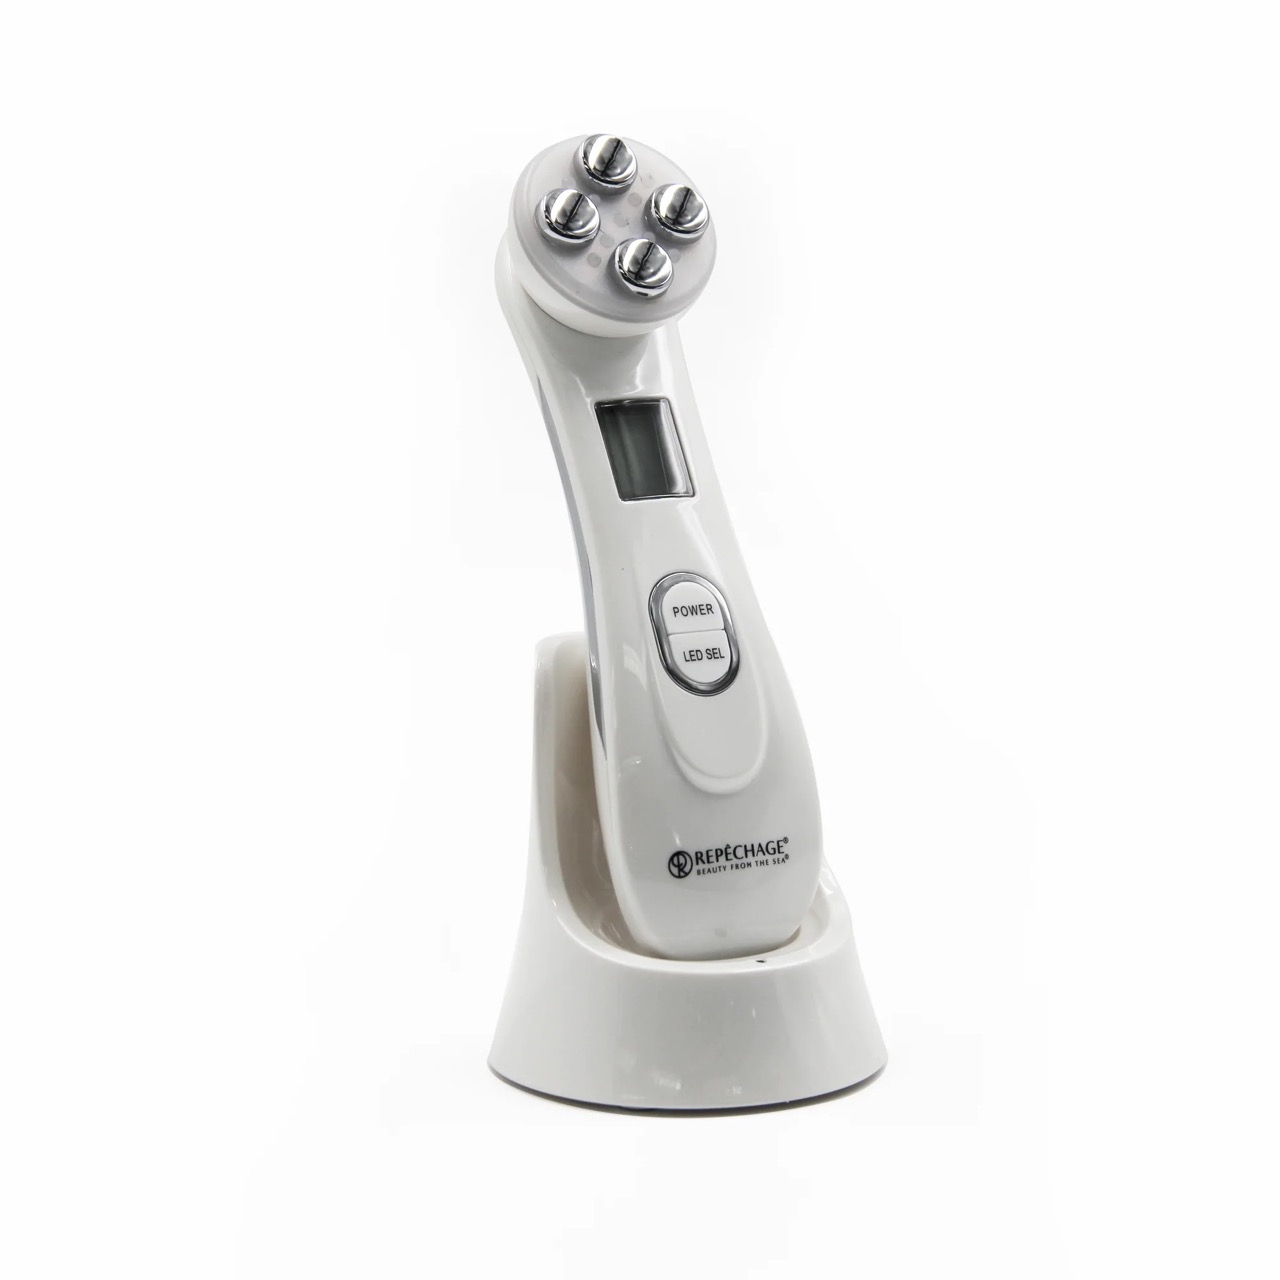 The Repêchage LED Radio Frequency and EMS Skin-Tightening Machine.